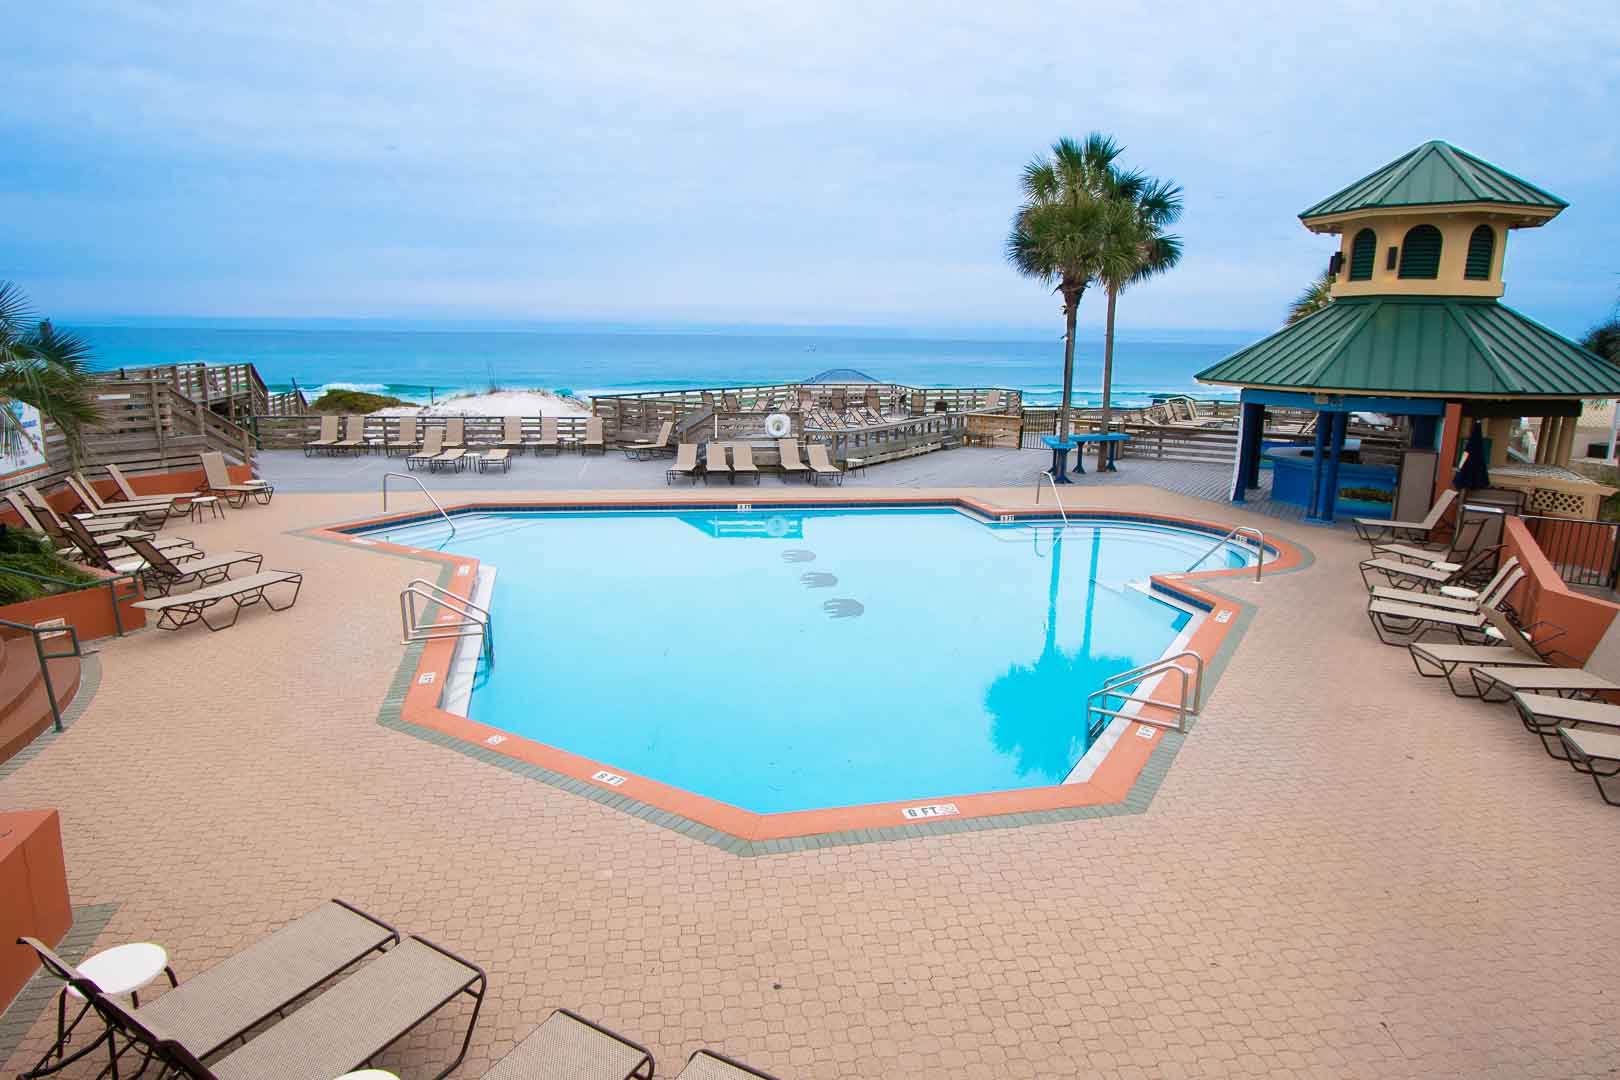 A spacious outdoor swimming pool with an ocean view at VRI's Bay Club of Sandestin in Florida.